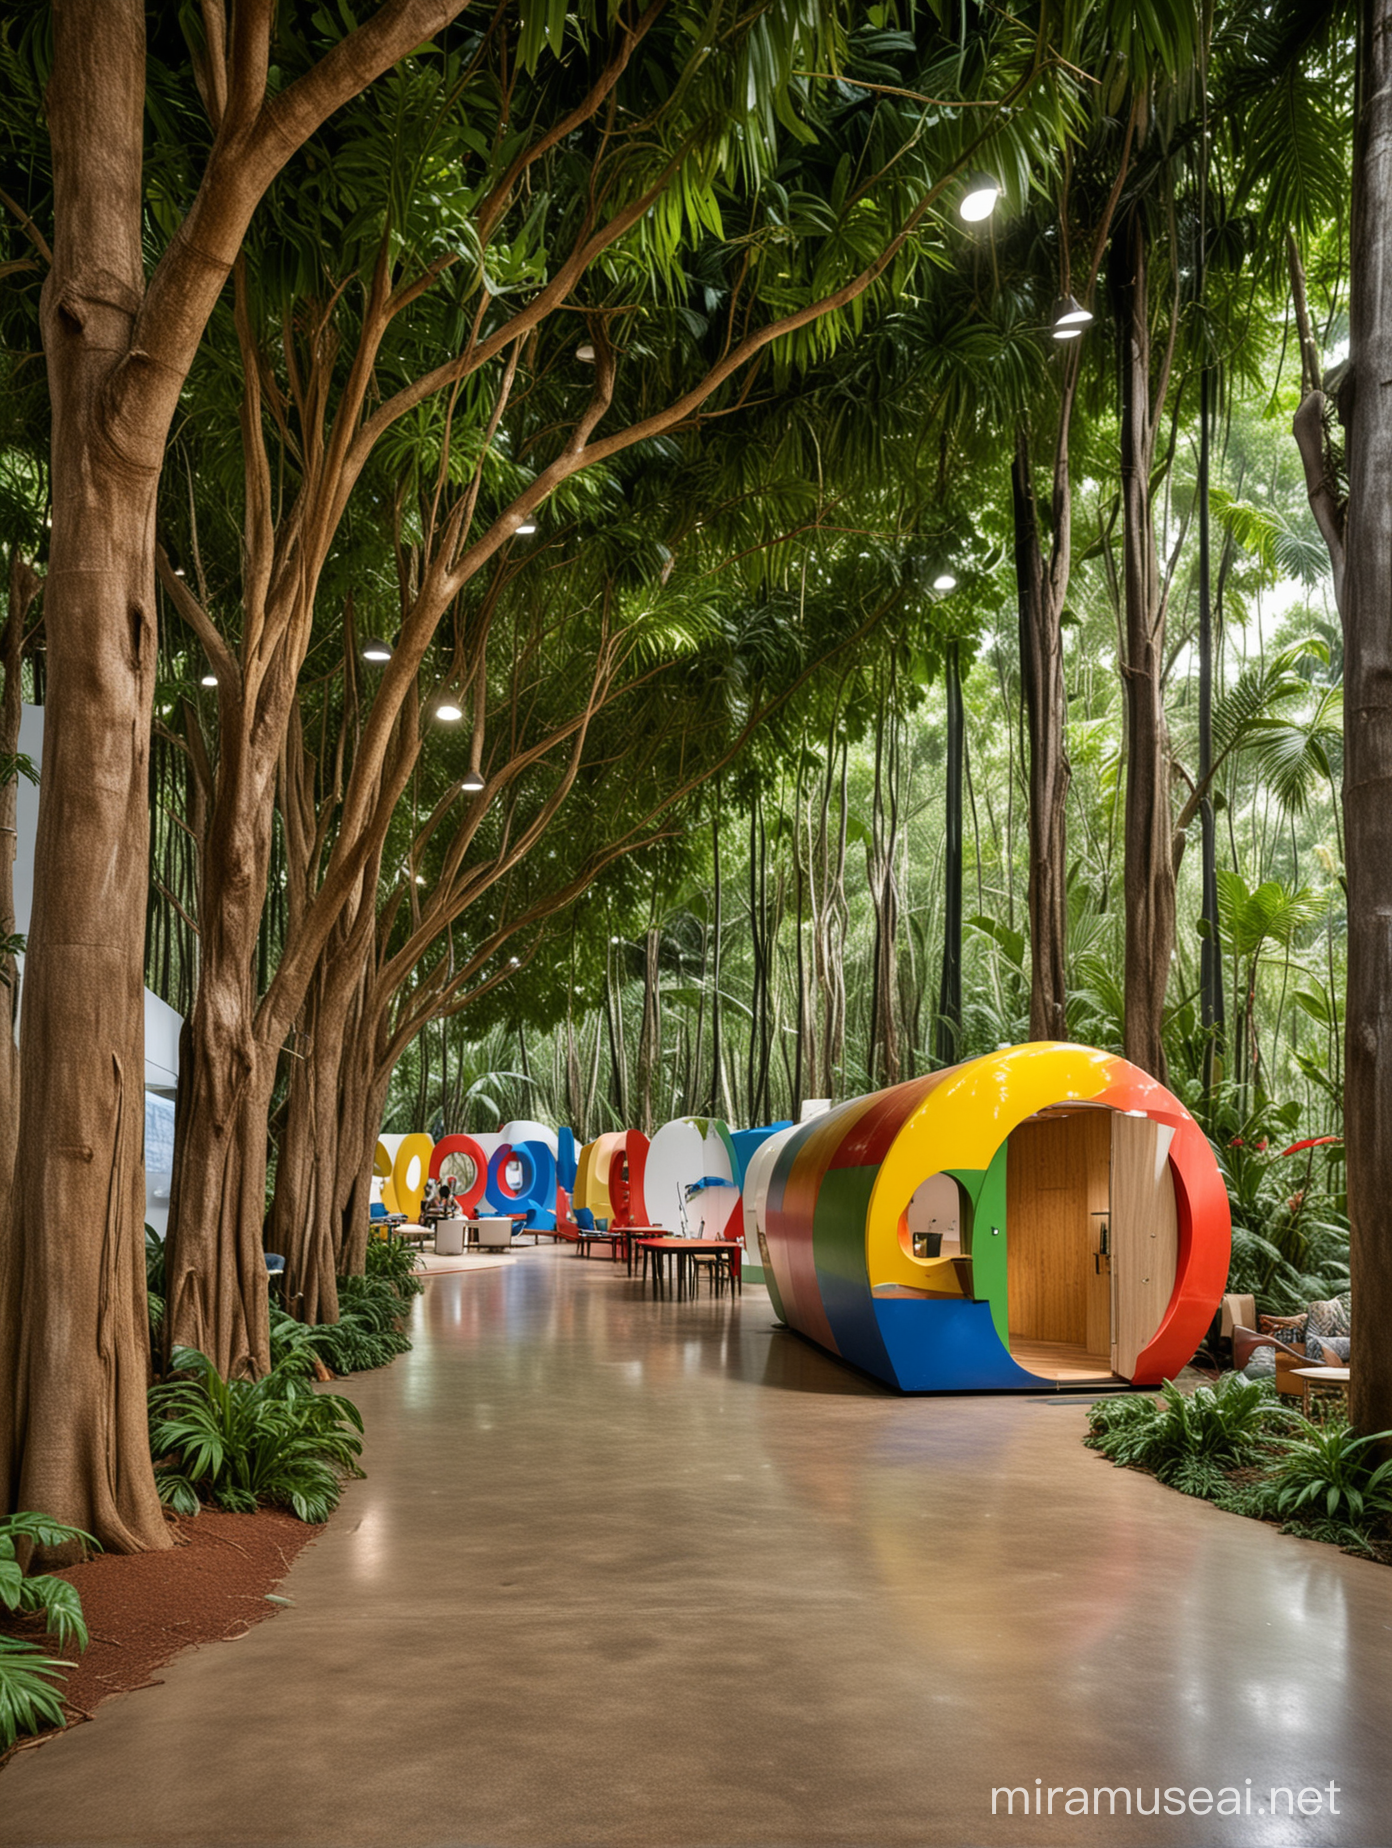 Colorful Google Office Showroom in the Amazon Forest of Brazil